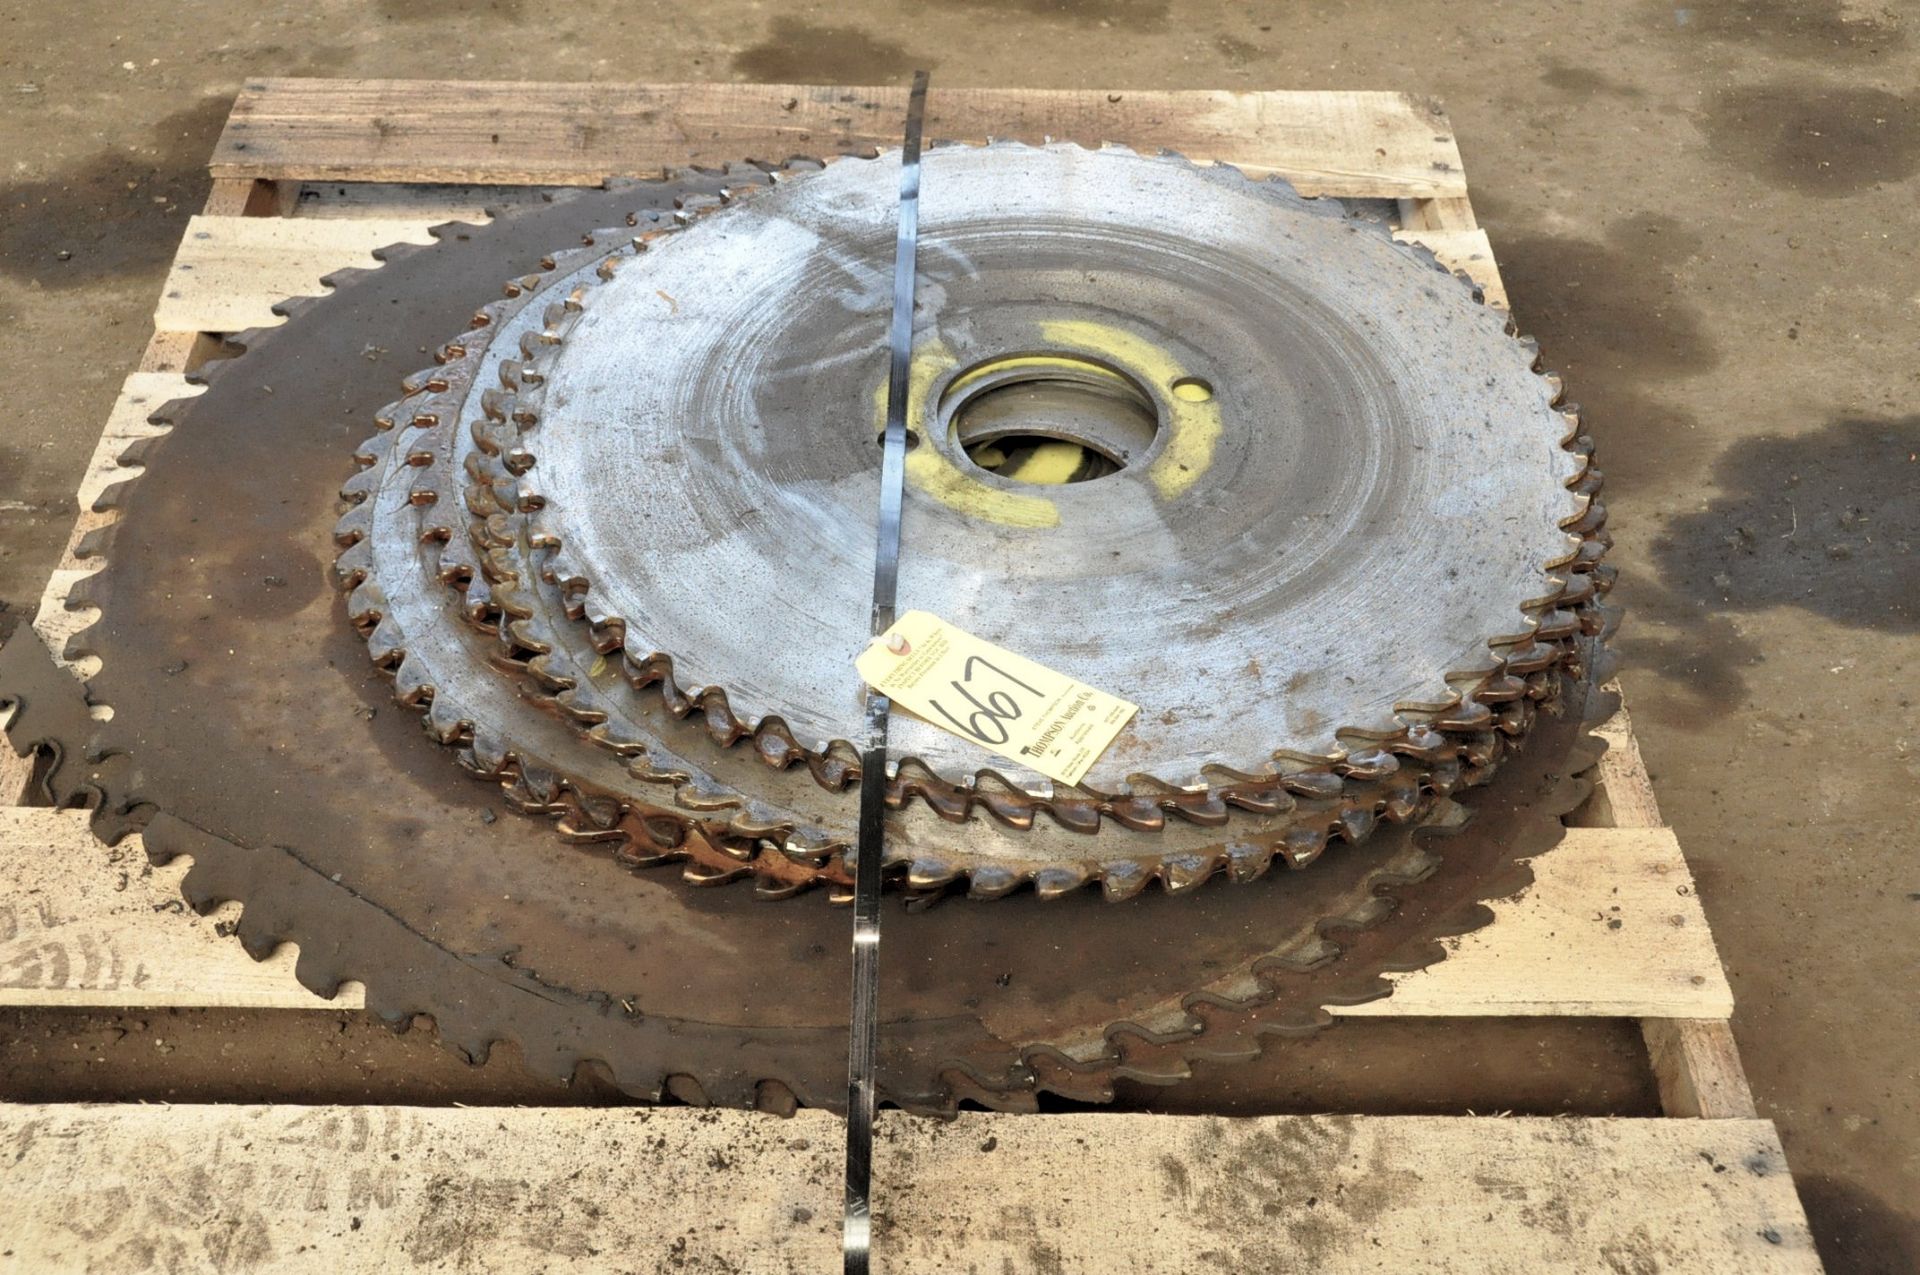 Lot-26" and 36" Diameter Saw Blades on (1) Pallet, (Forge Bldg)